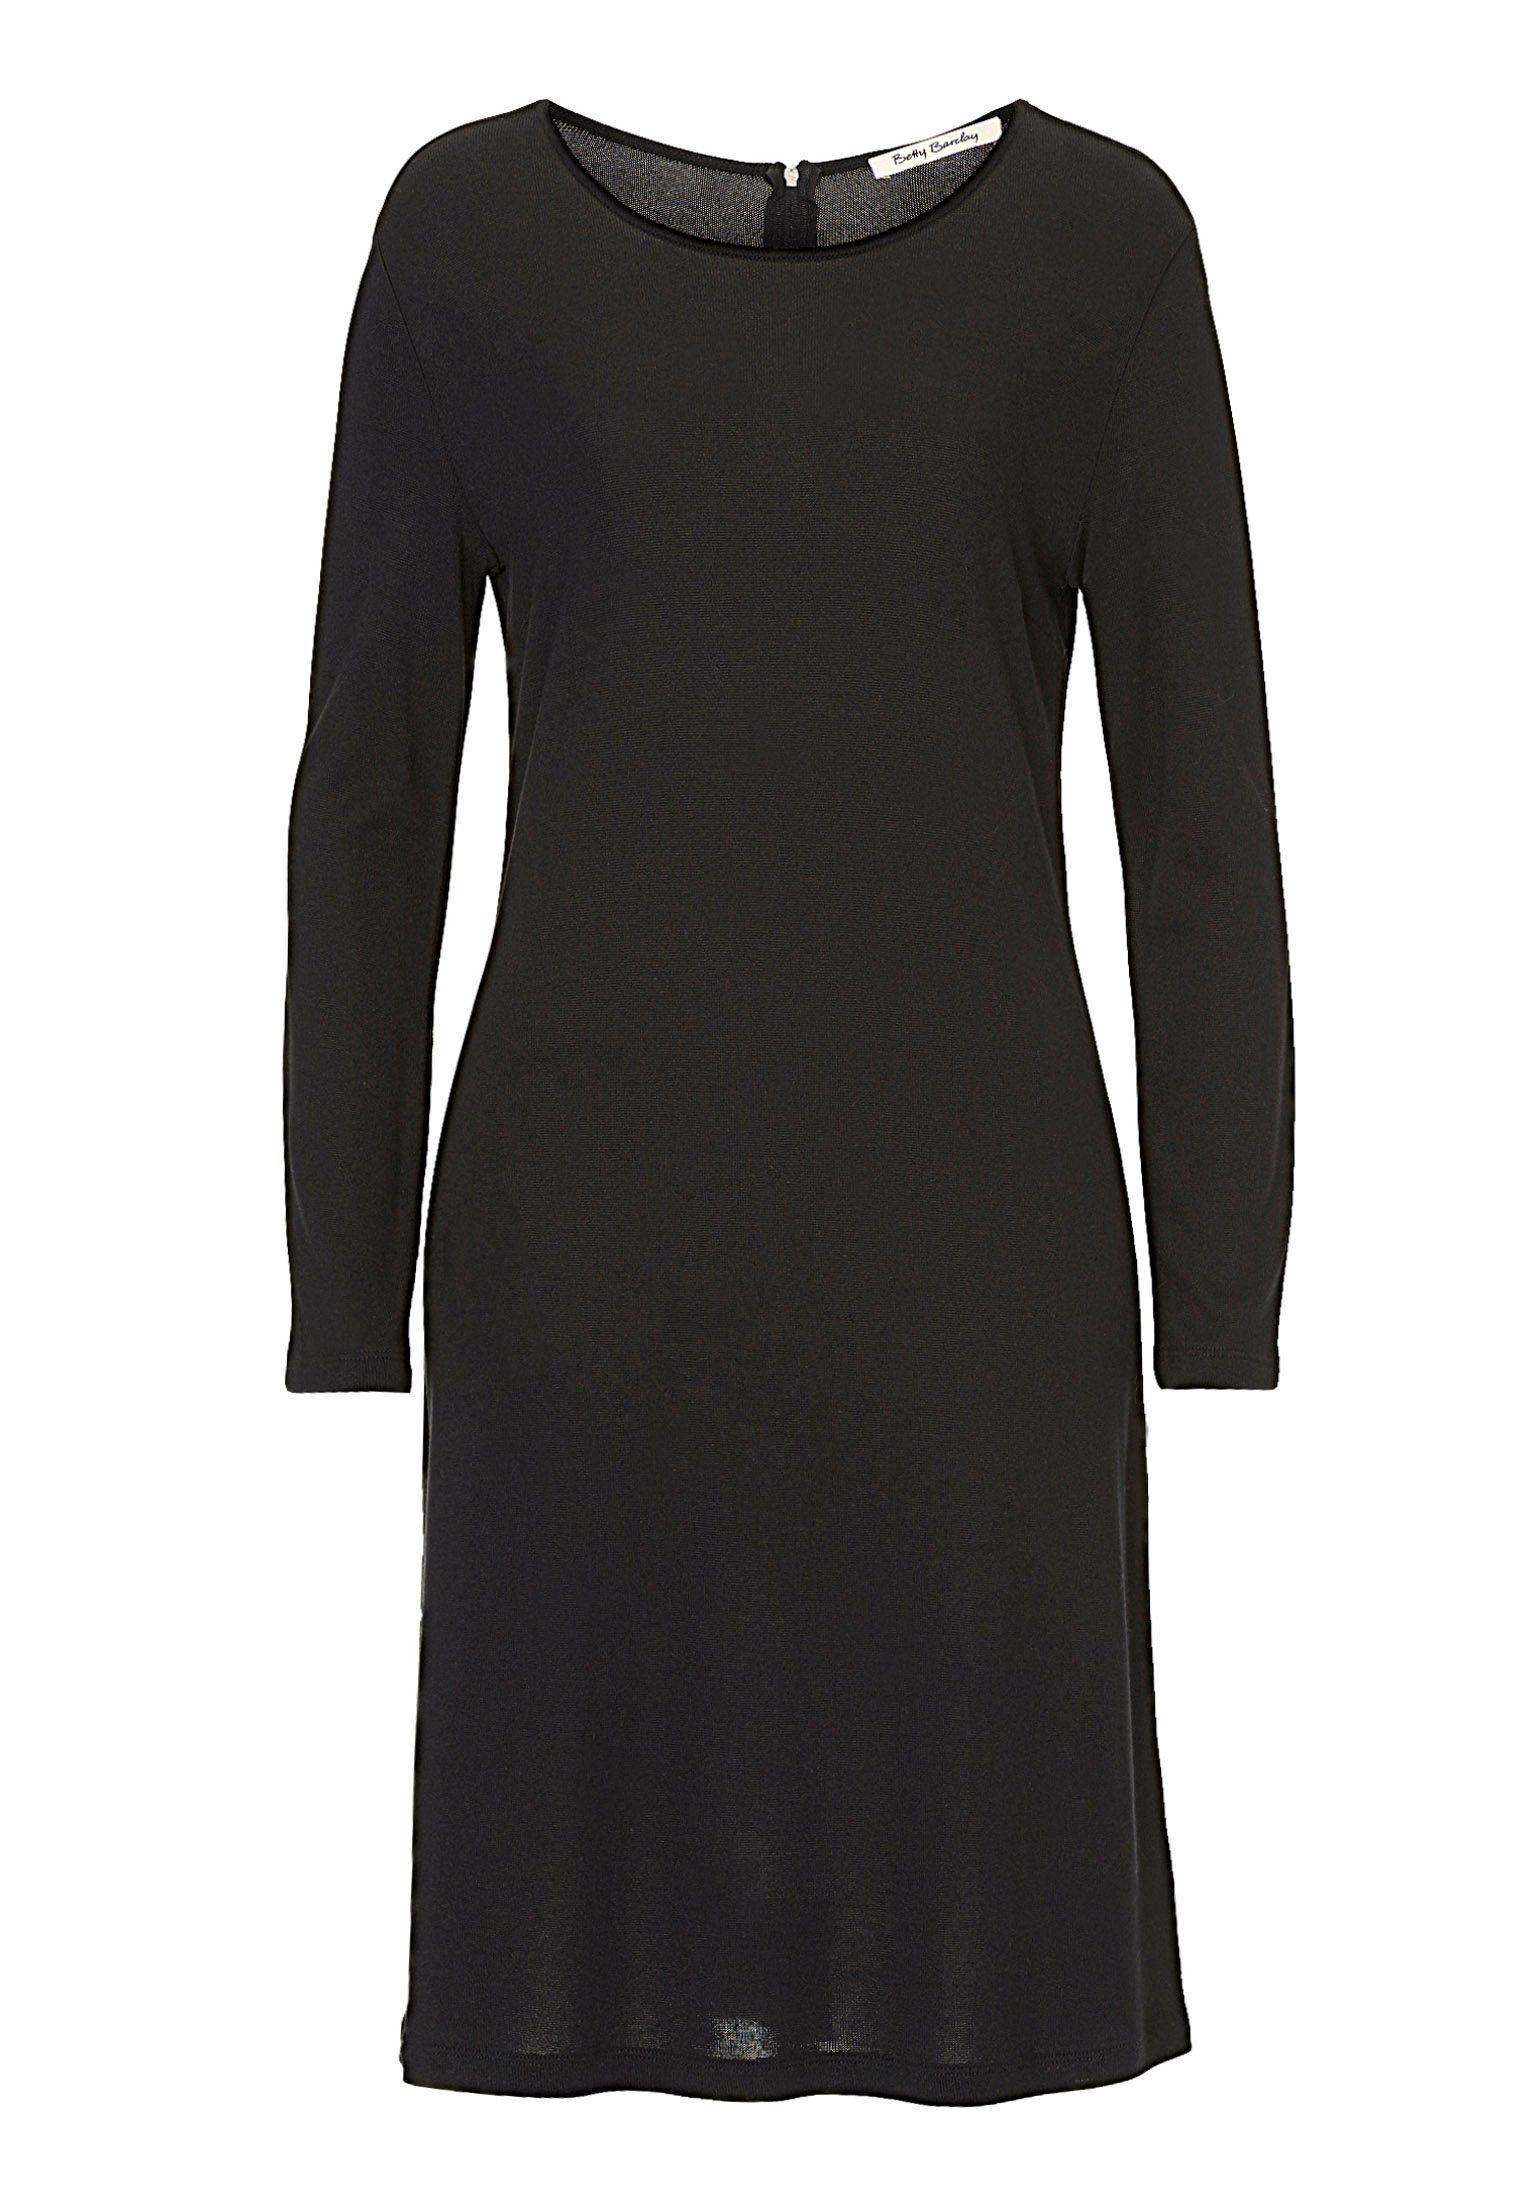 Betty barclay Knitted Dress in Black | Lyst